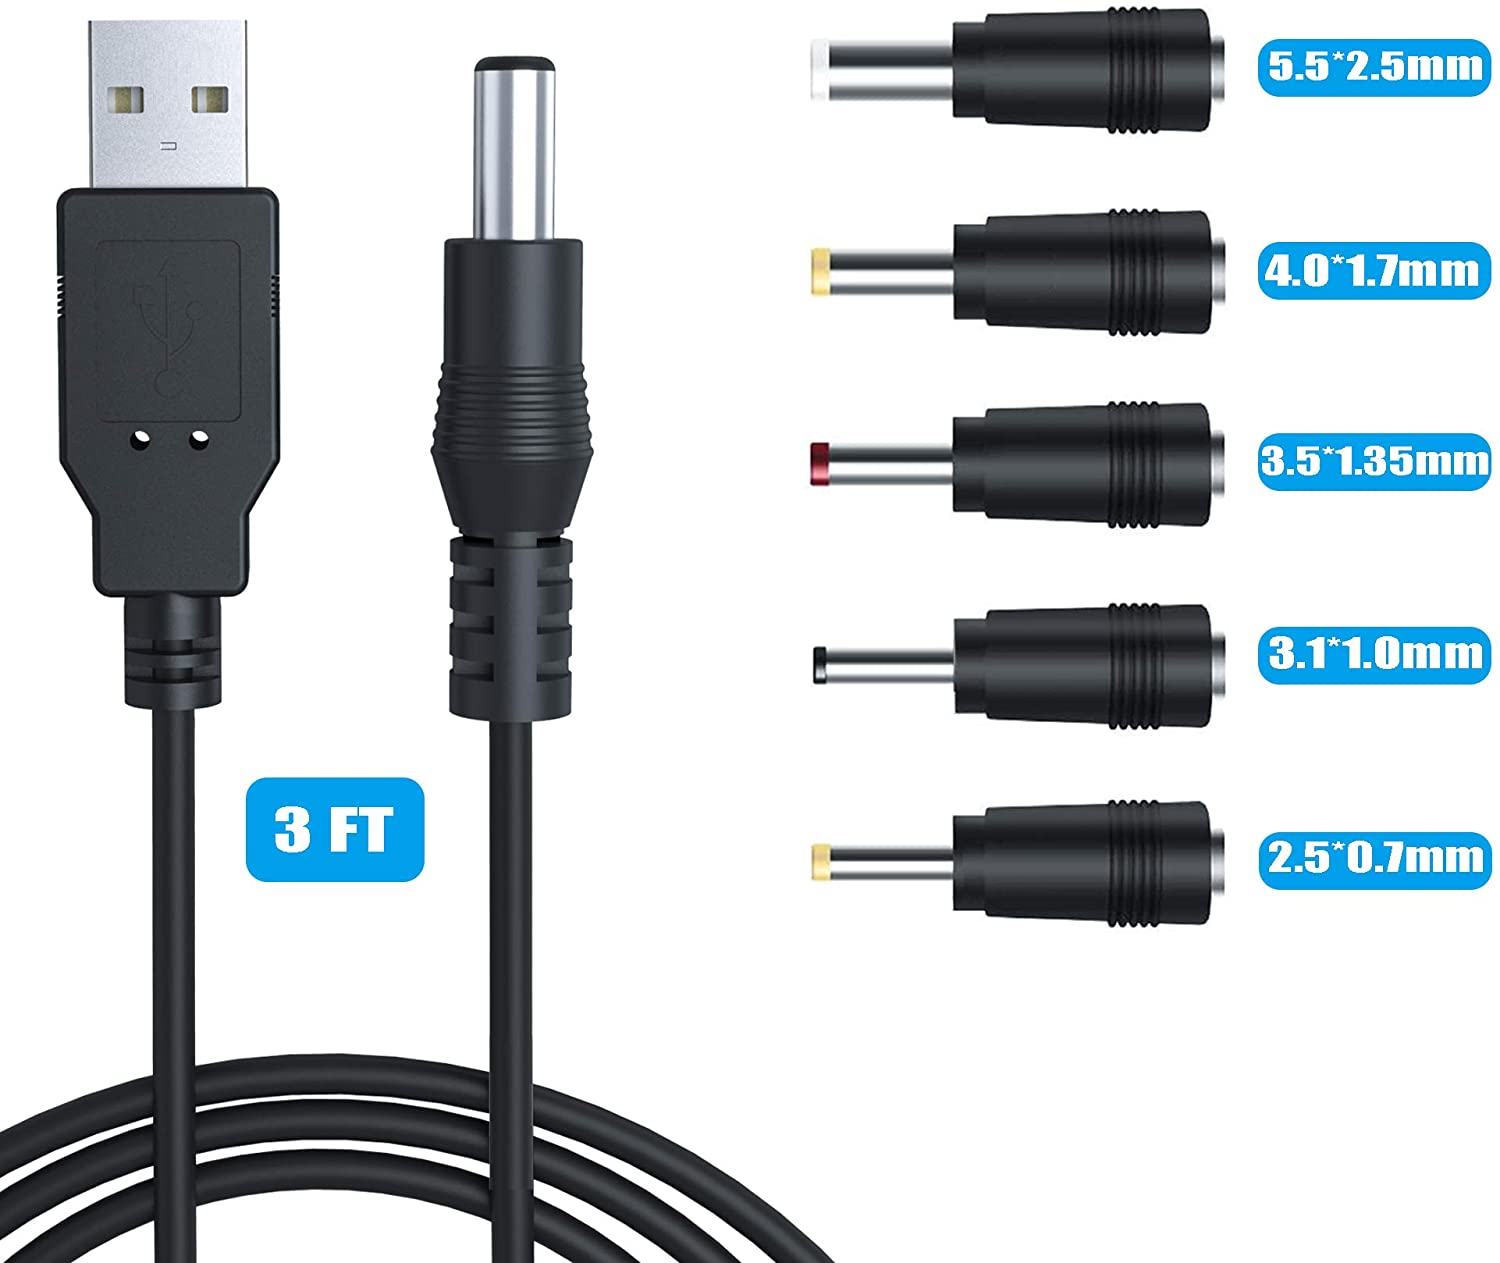 USB A Male to 2.0 2.1 2.5 3.5 4.0 5.5mm Connector 5V DC Charger